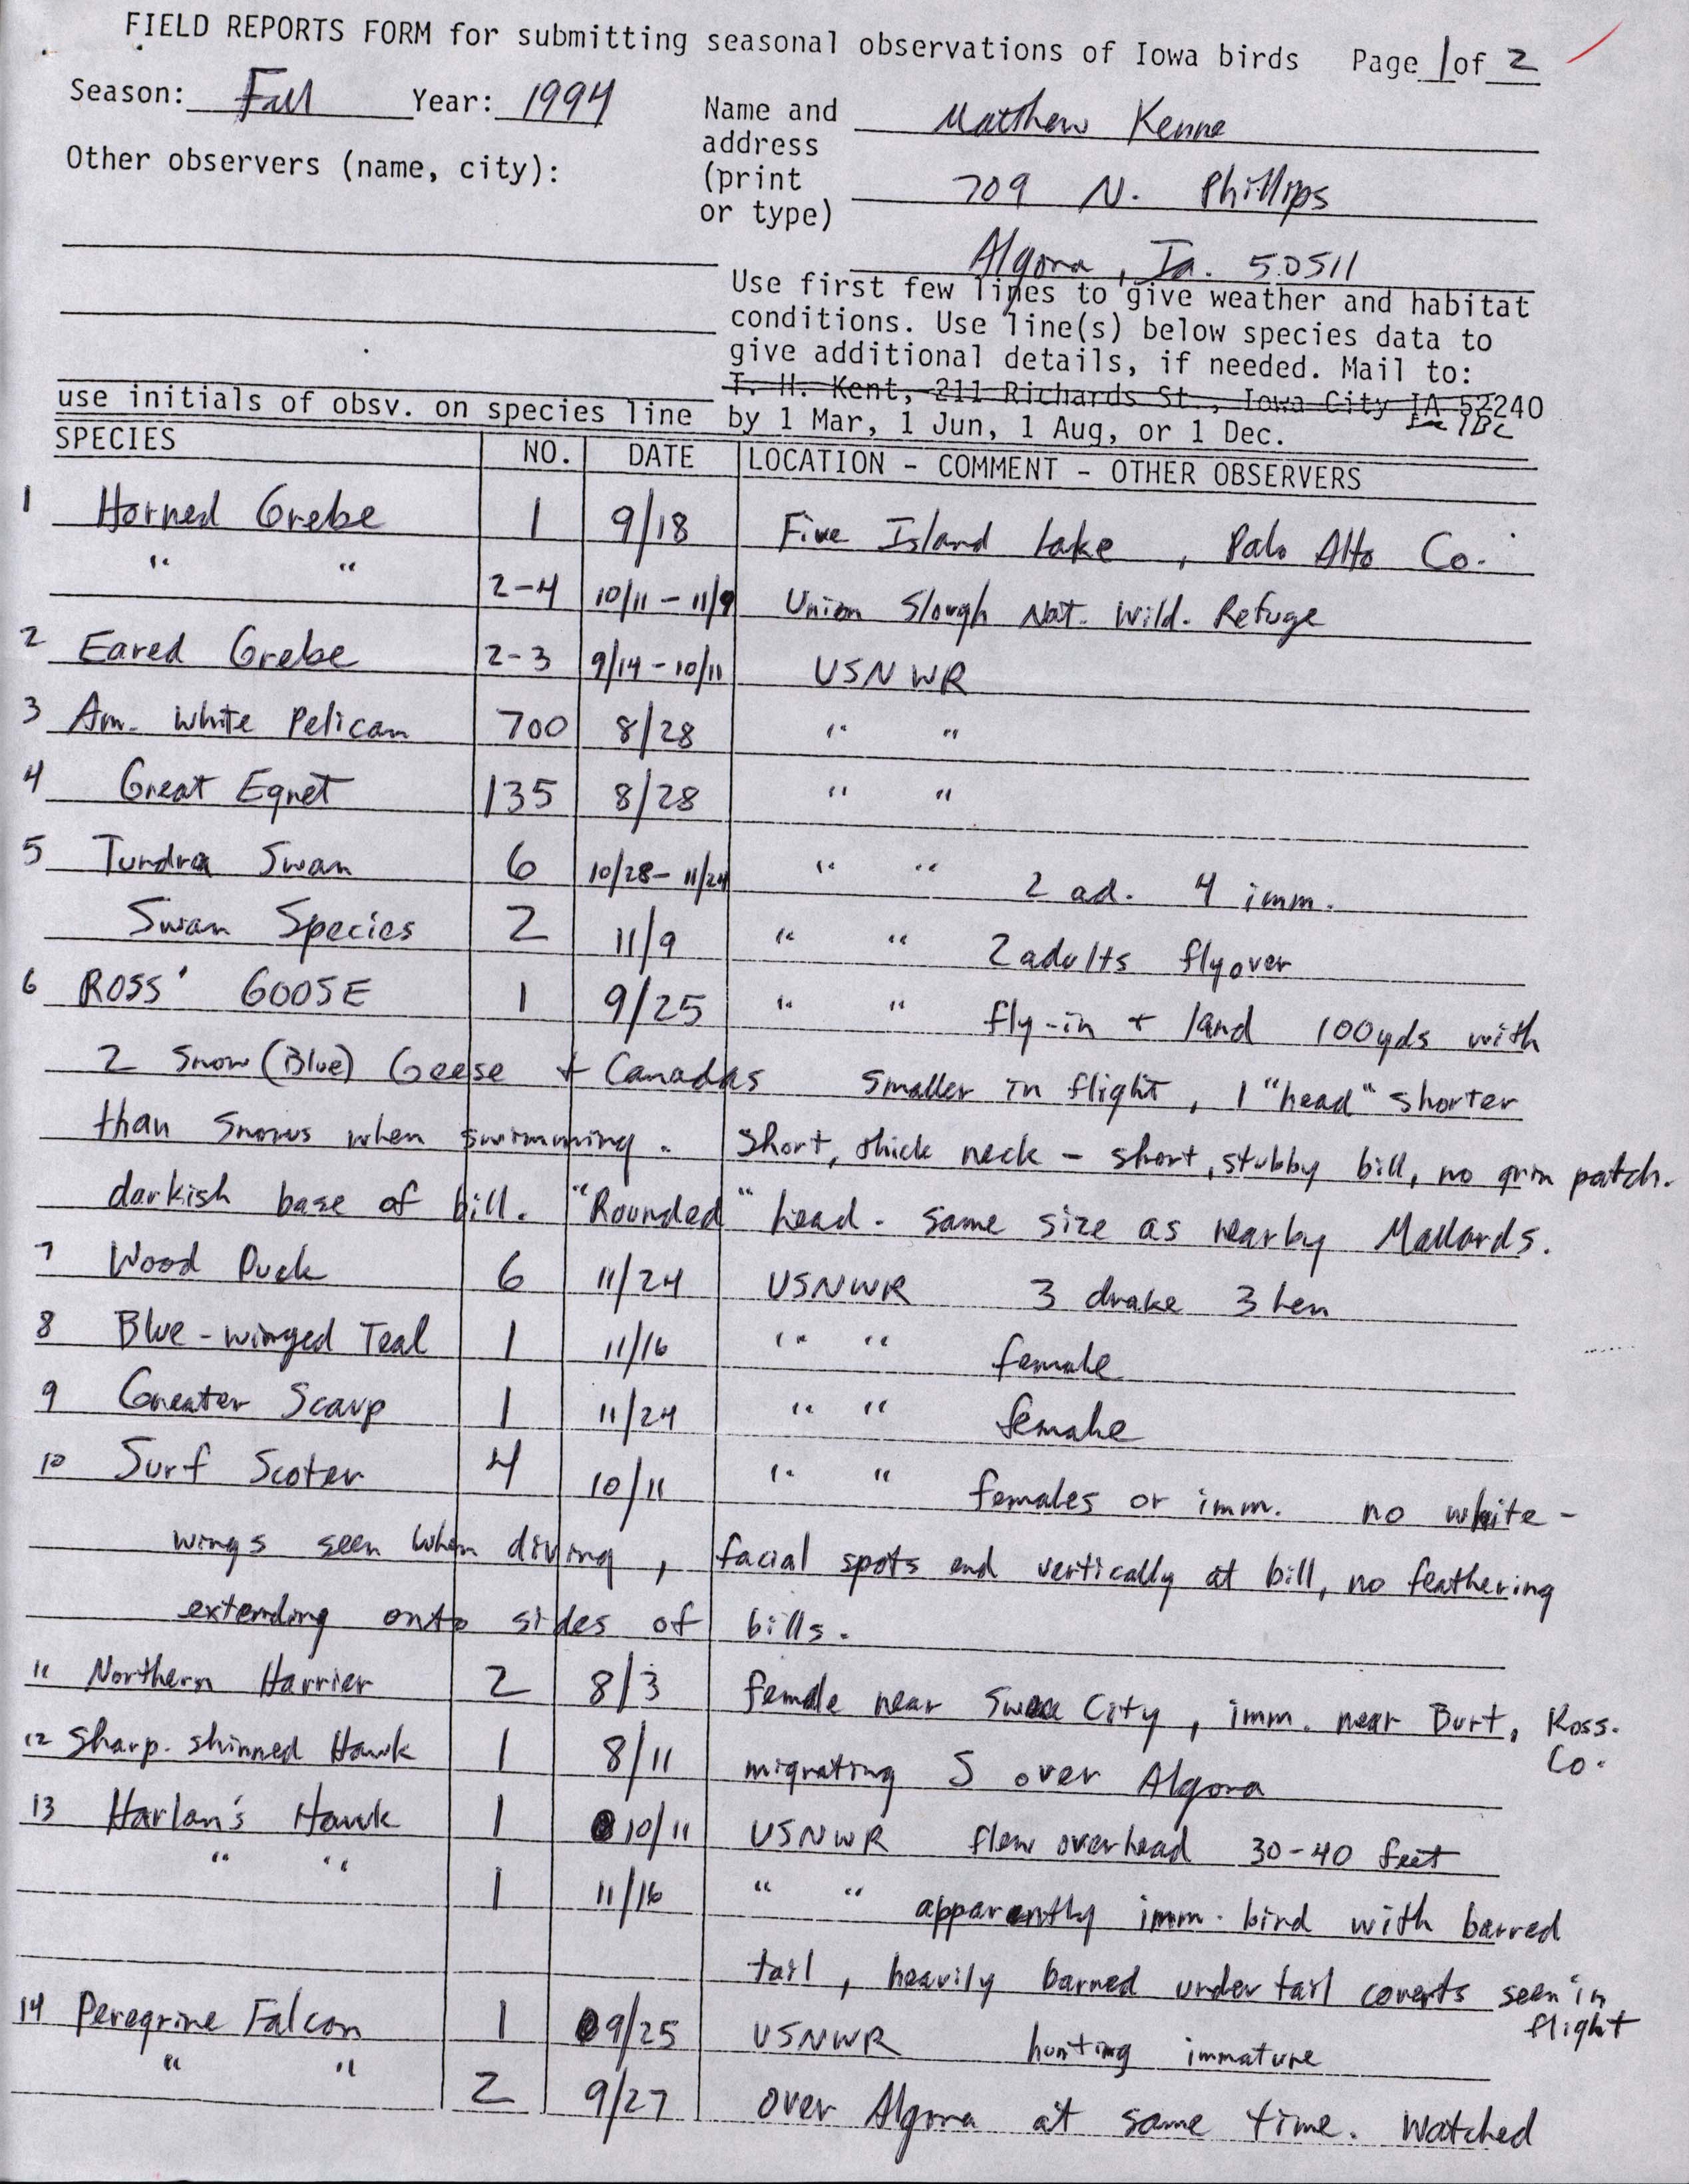 Field reports form for submitting seasonal observations of Iowa birds, Matthew Kenne, fall 1994